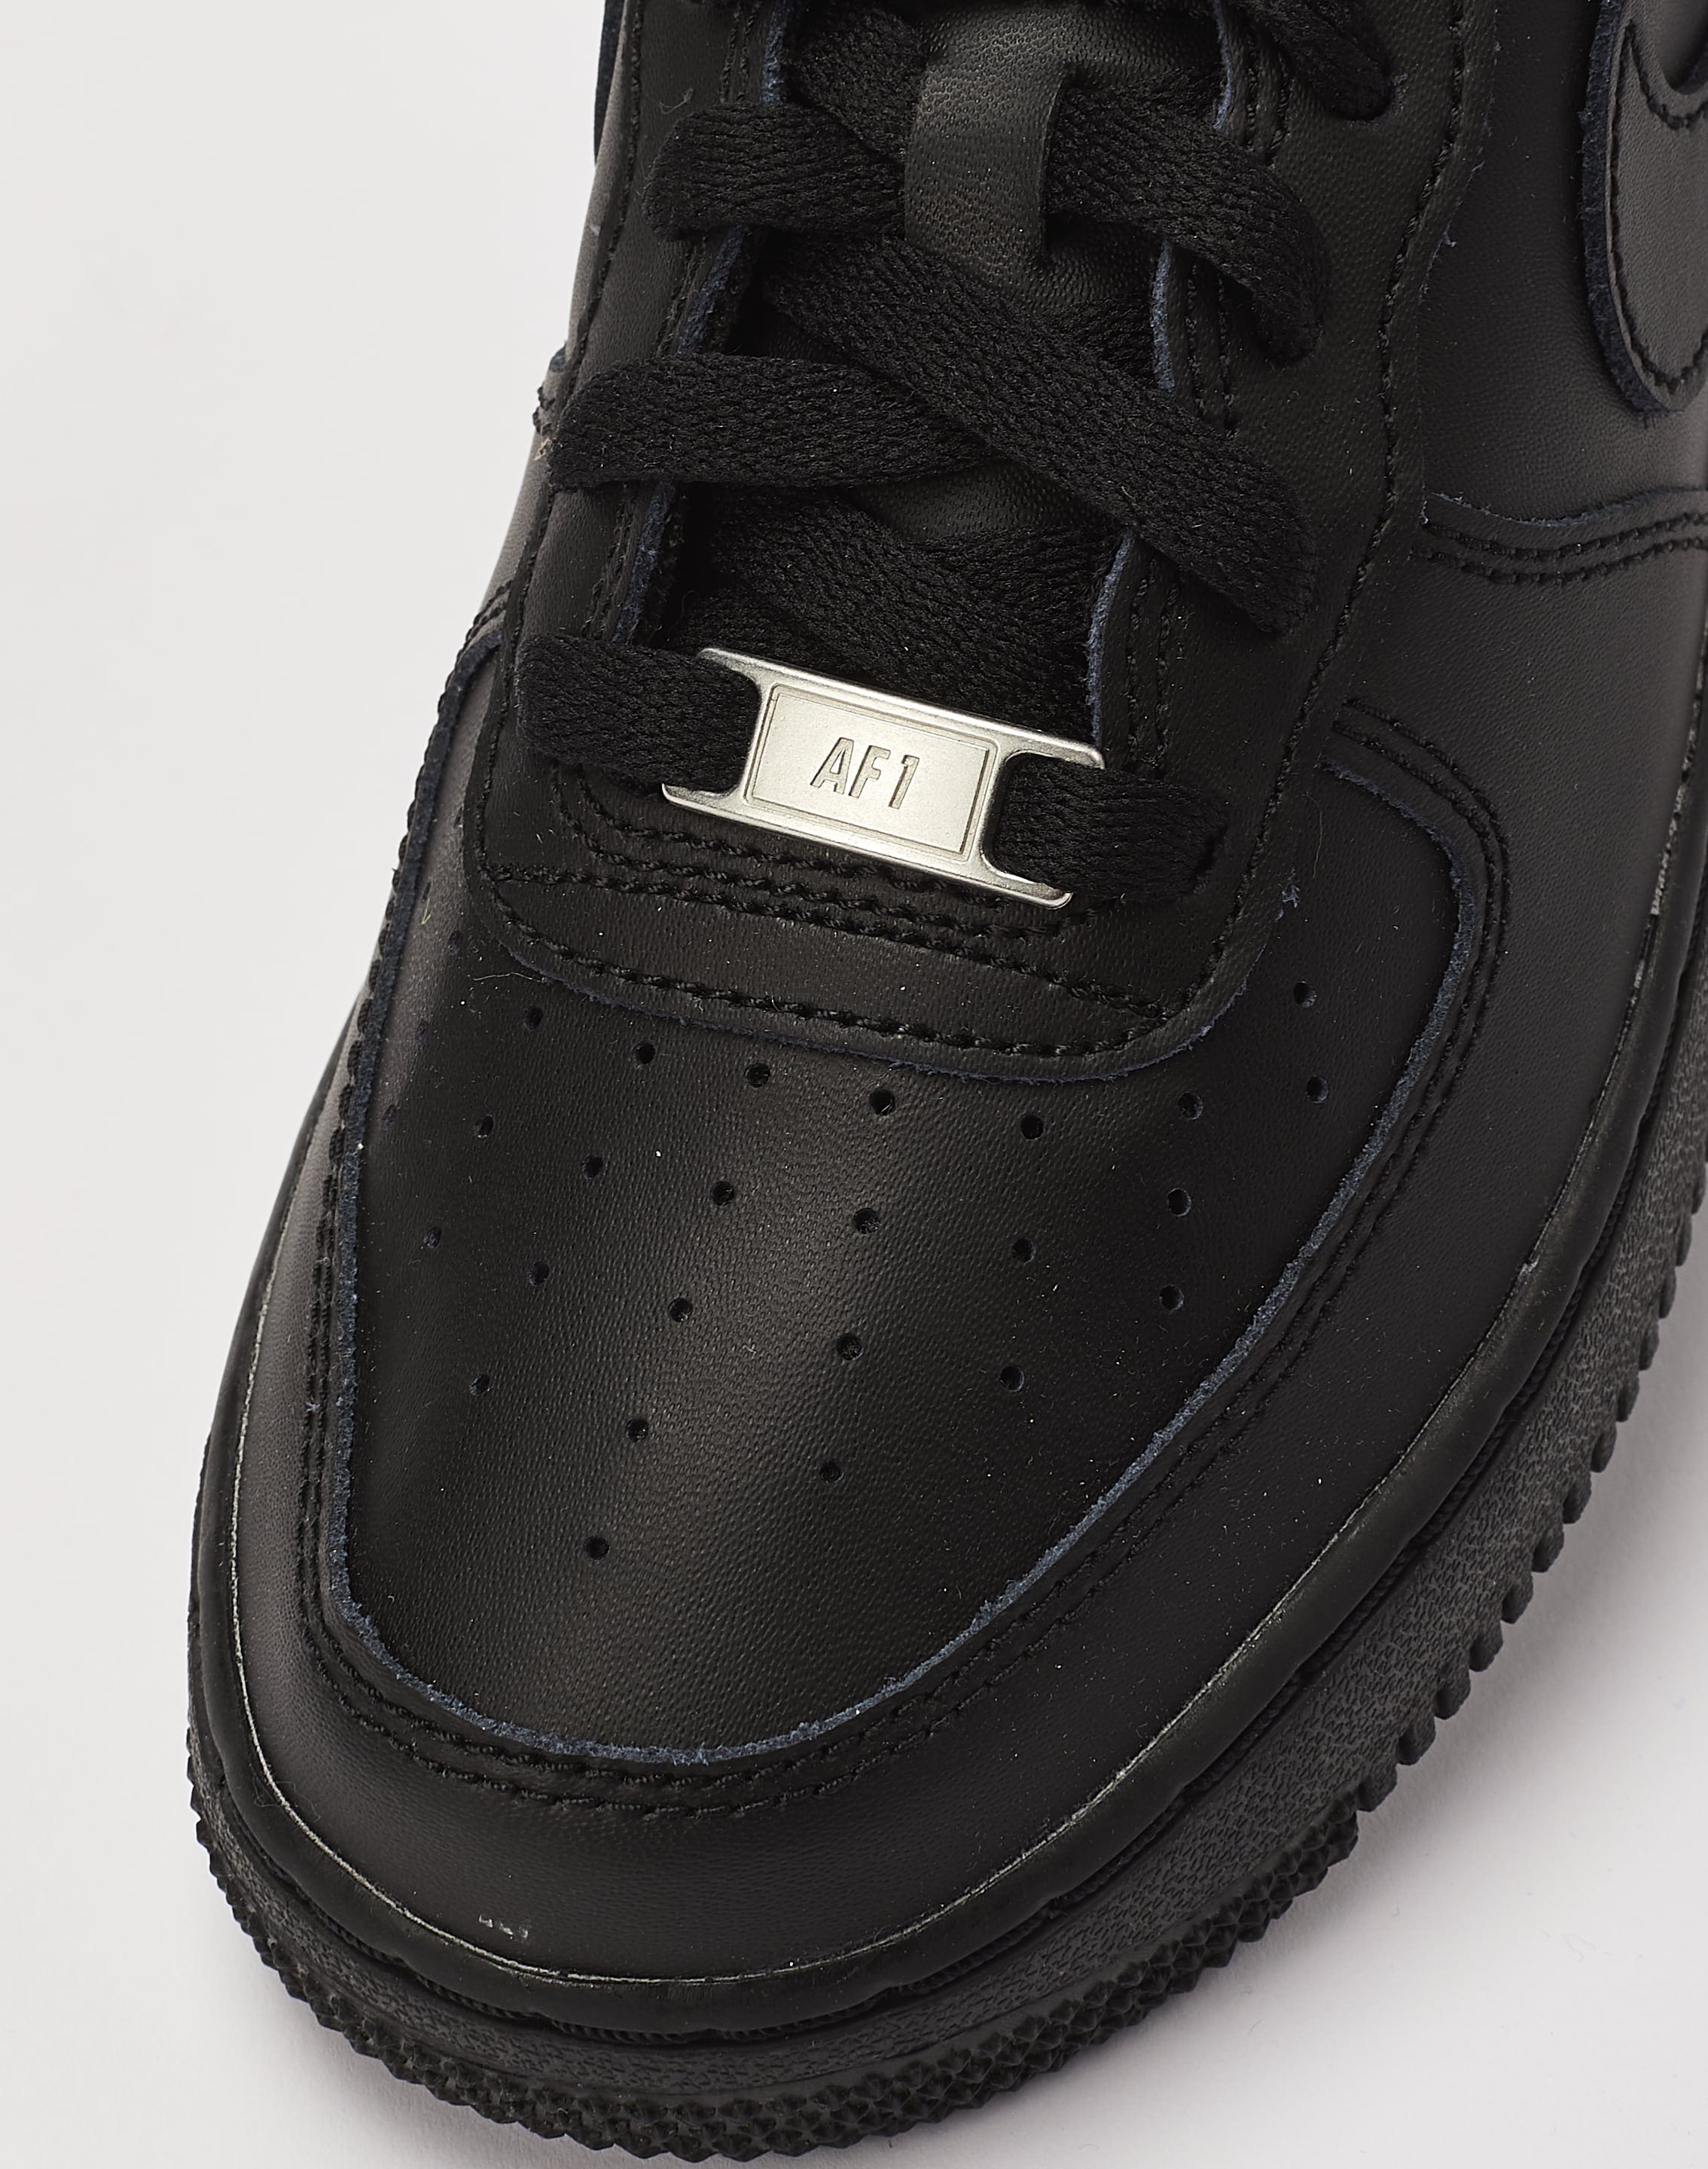 Buy Nike Air Force 1 LE (DH2925) from £39.99 (Today) – Best Black